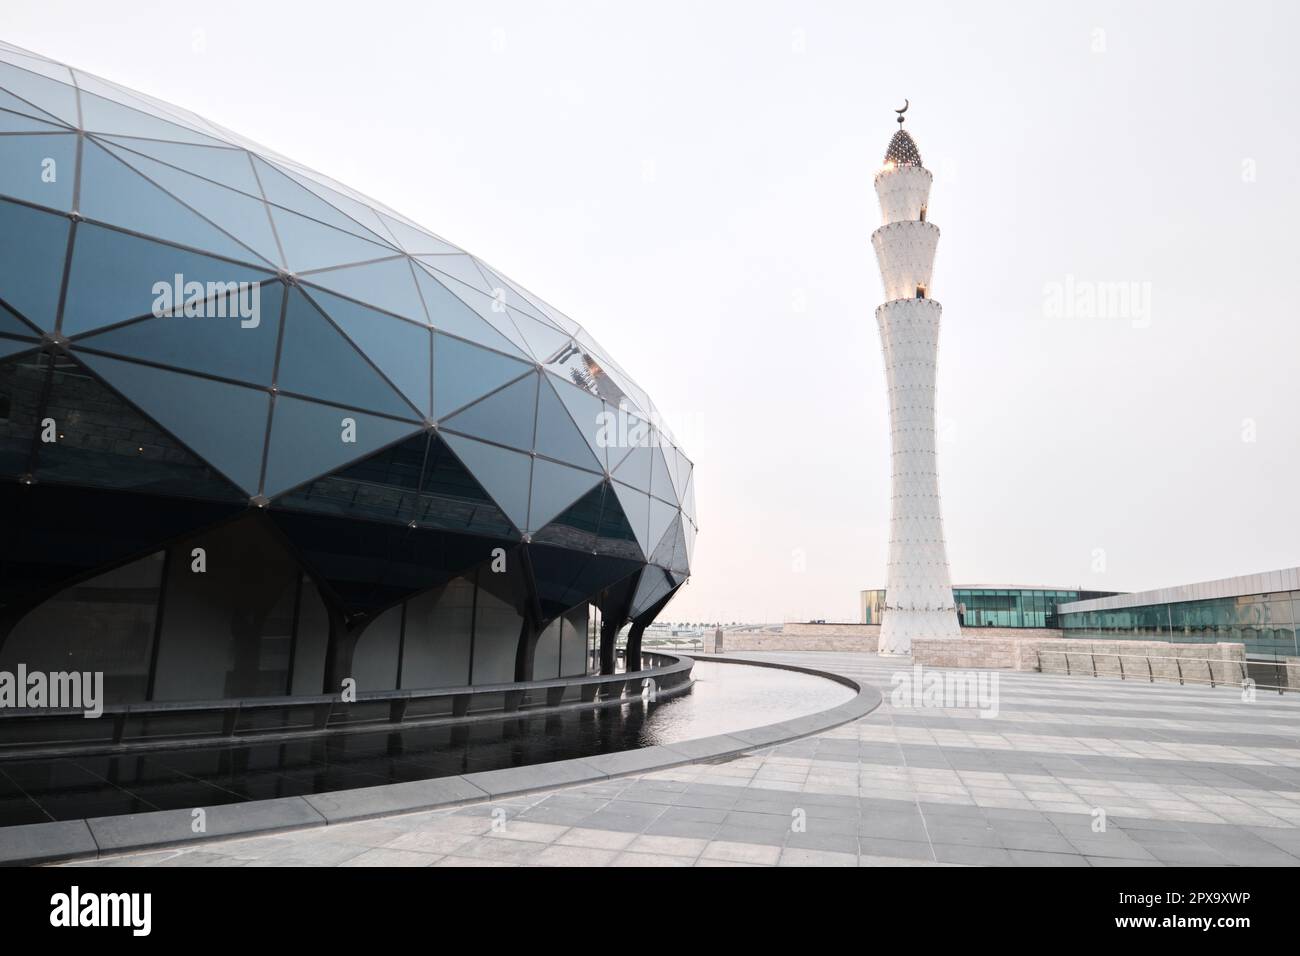 Doha, Qatar - April 2023: Hamad International Airport mosque with glass dome architecture and traditional minaret design Stock Photo